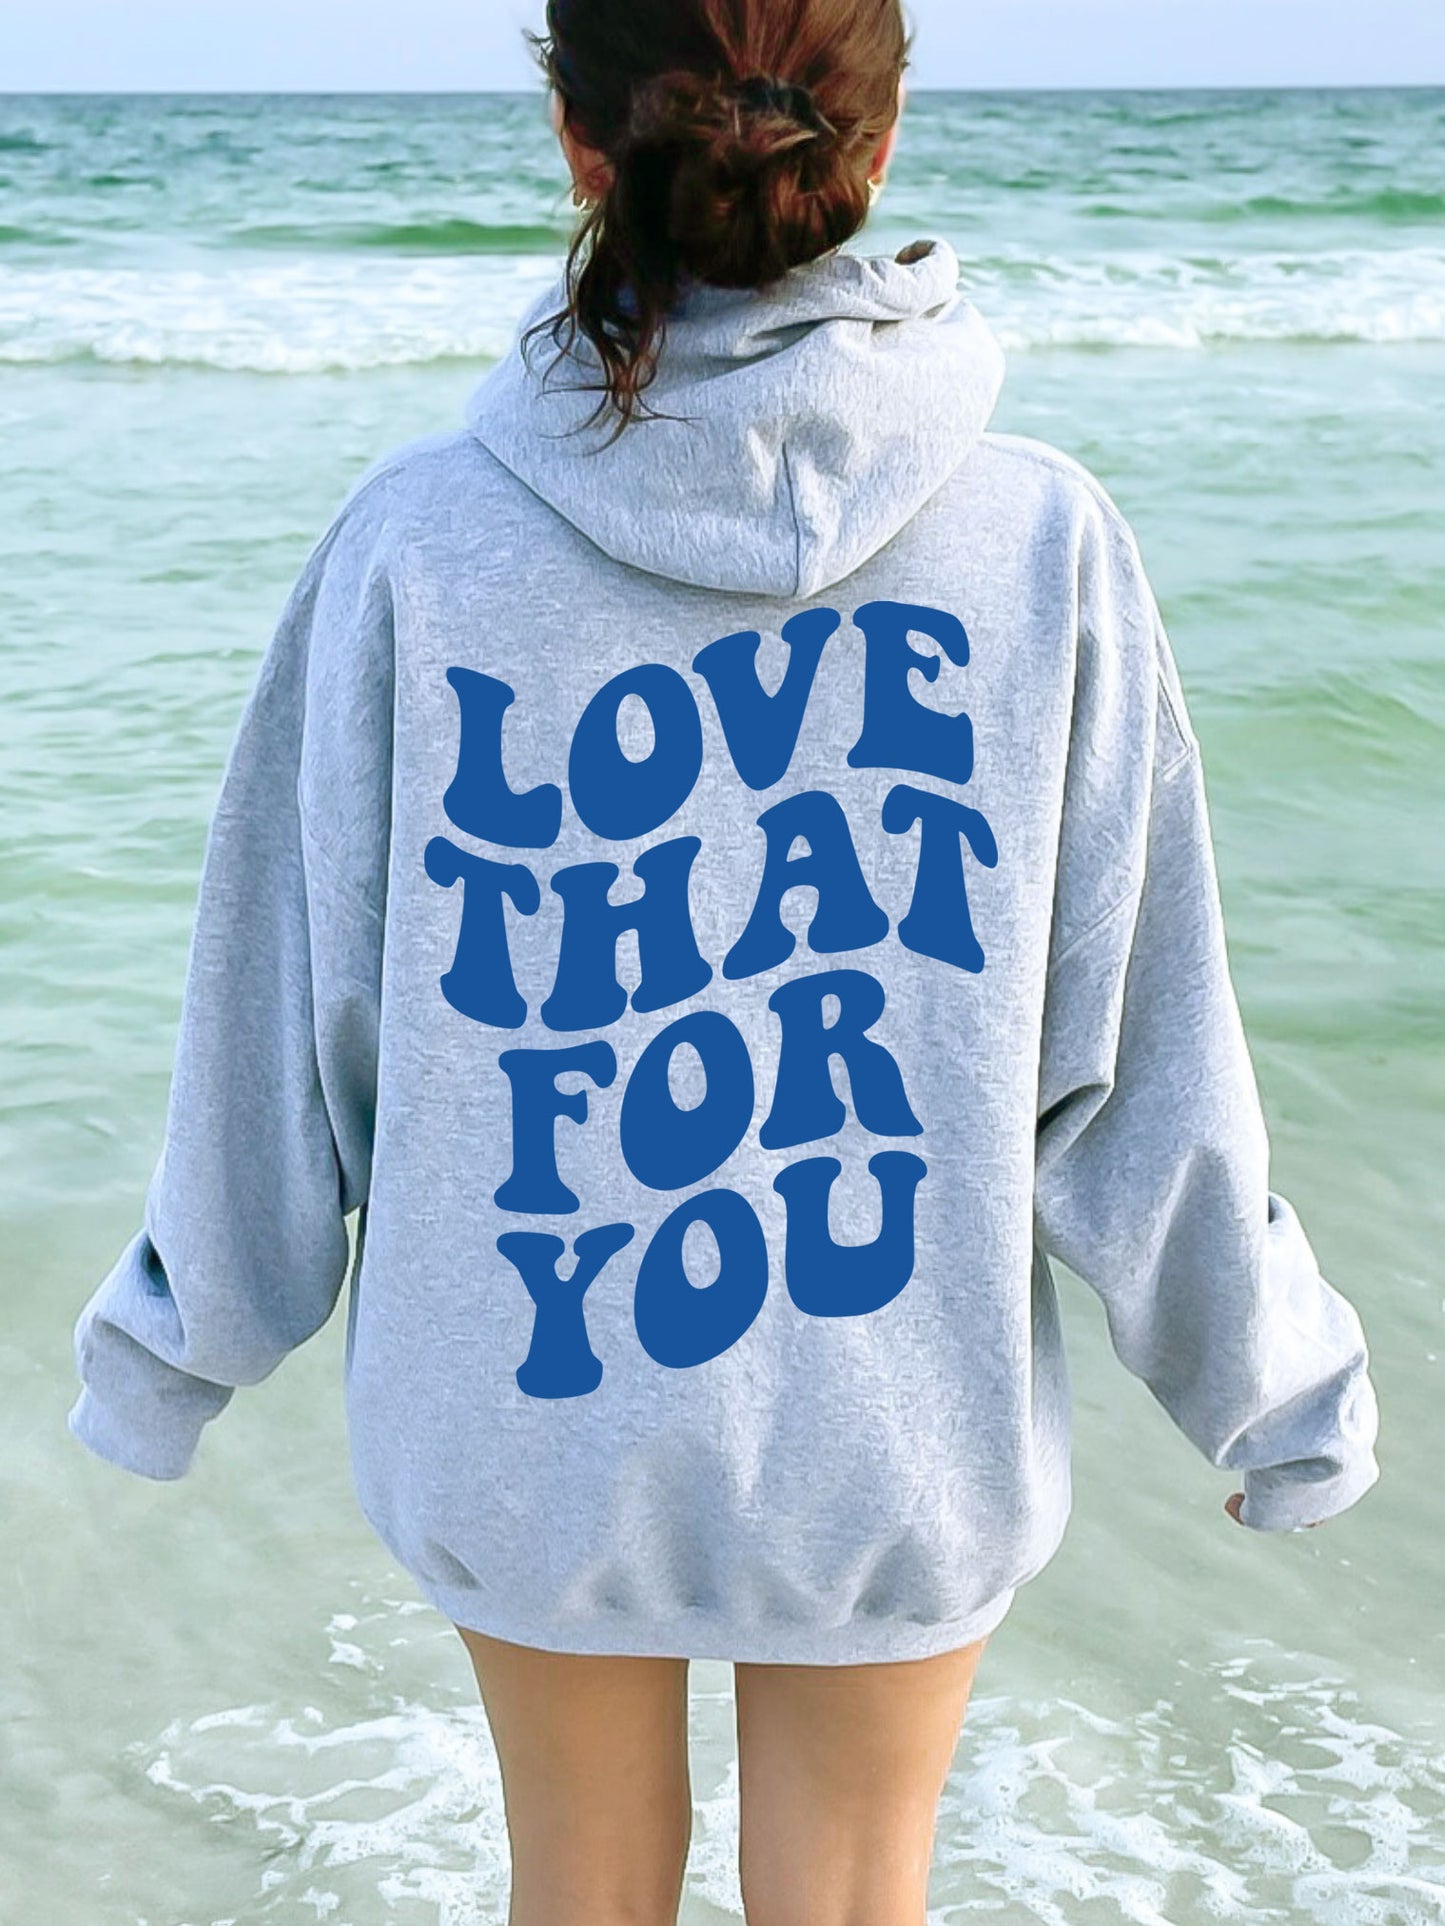 Love That For You Hoodie - Blue Ink - New!